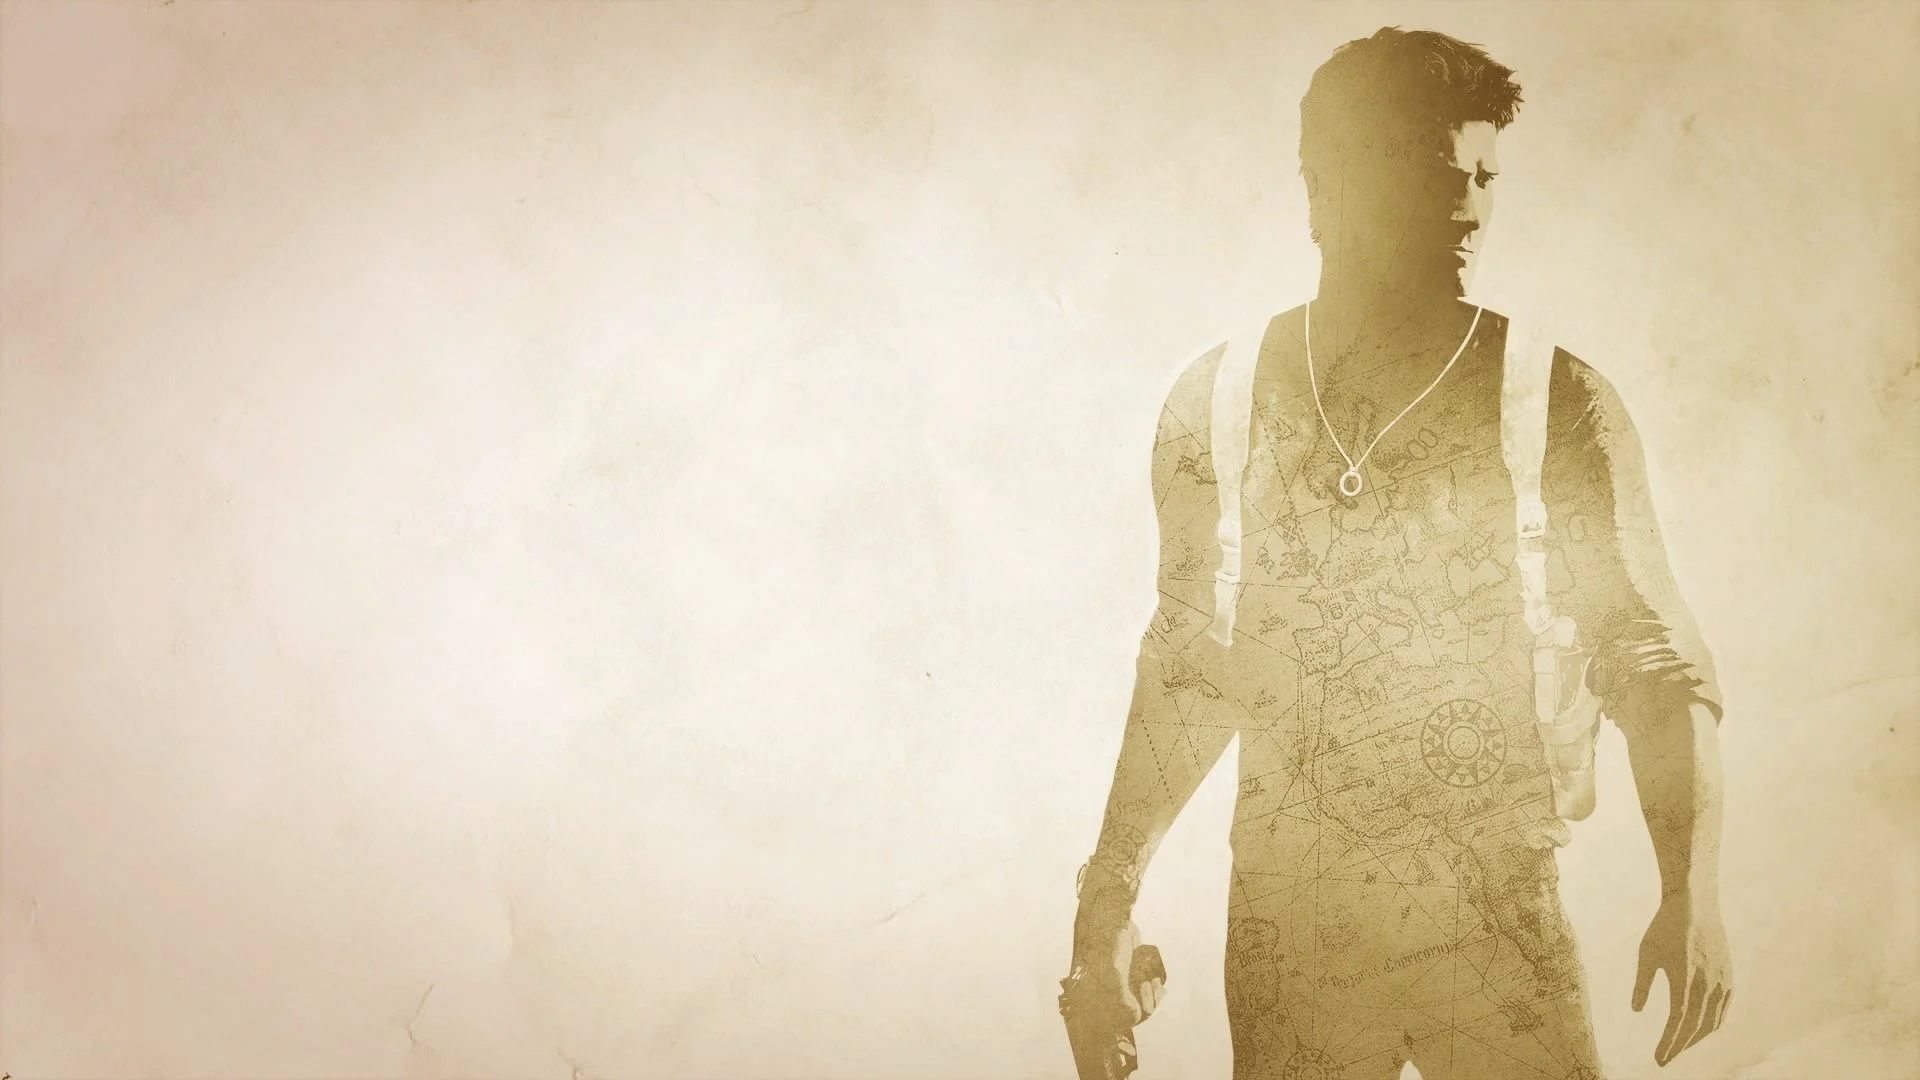 How does Uncharted's Nathan Drake survive so many bullets? They aren't  hitting him.